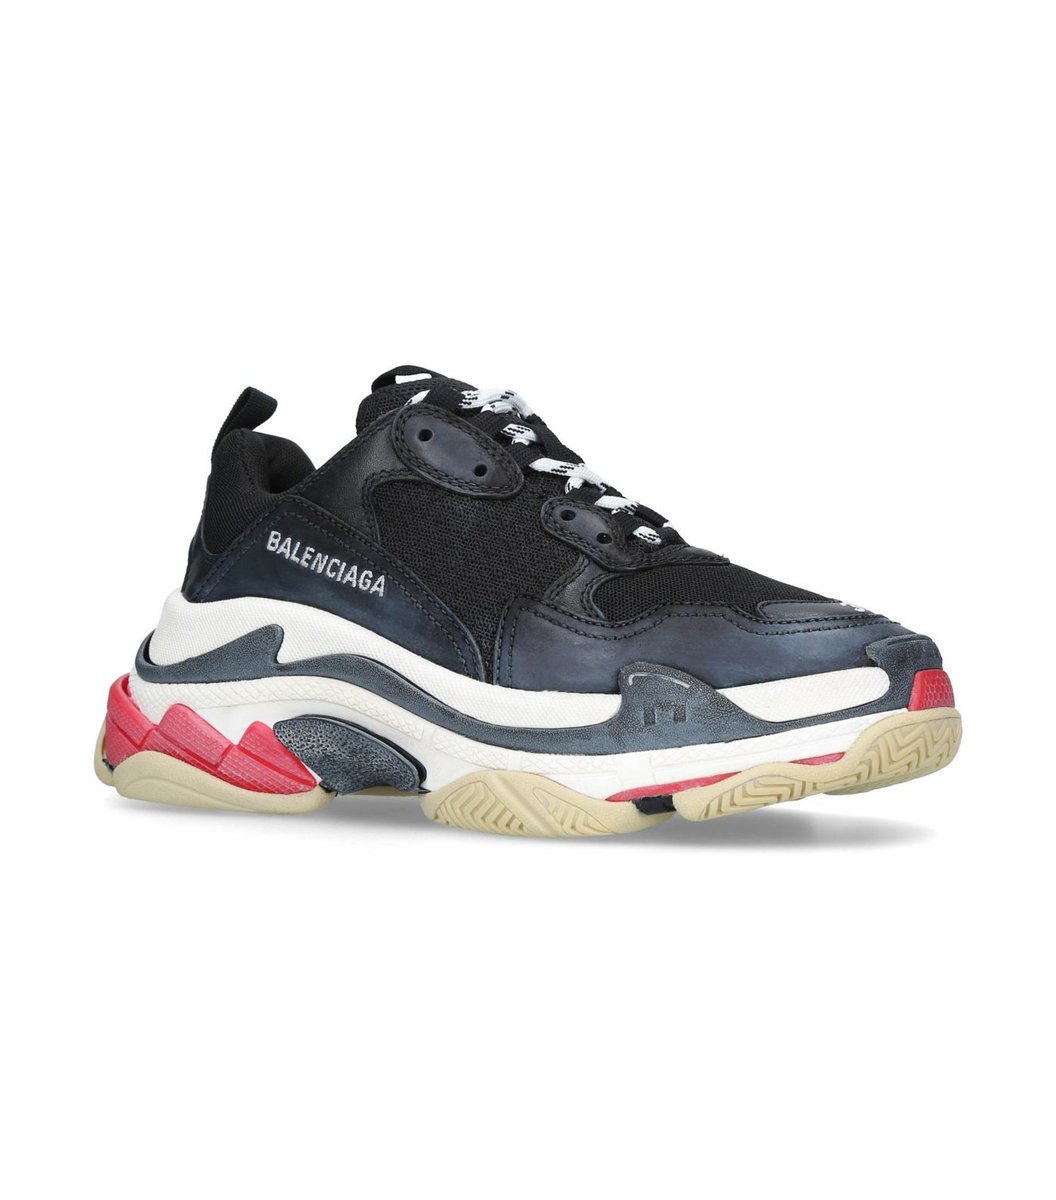 Leicester: Balenciaga Triple S- Really popular with some but hated by many others. Had some success but now thinks they're the best.